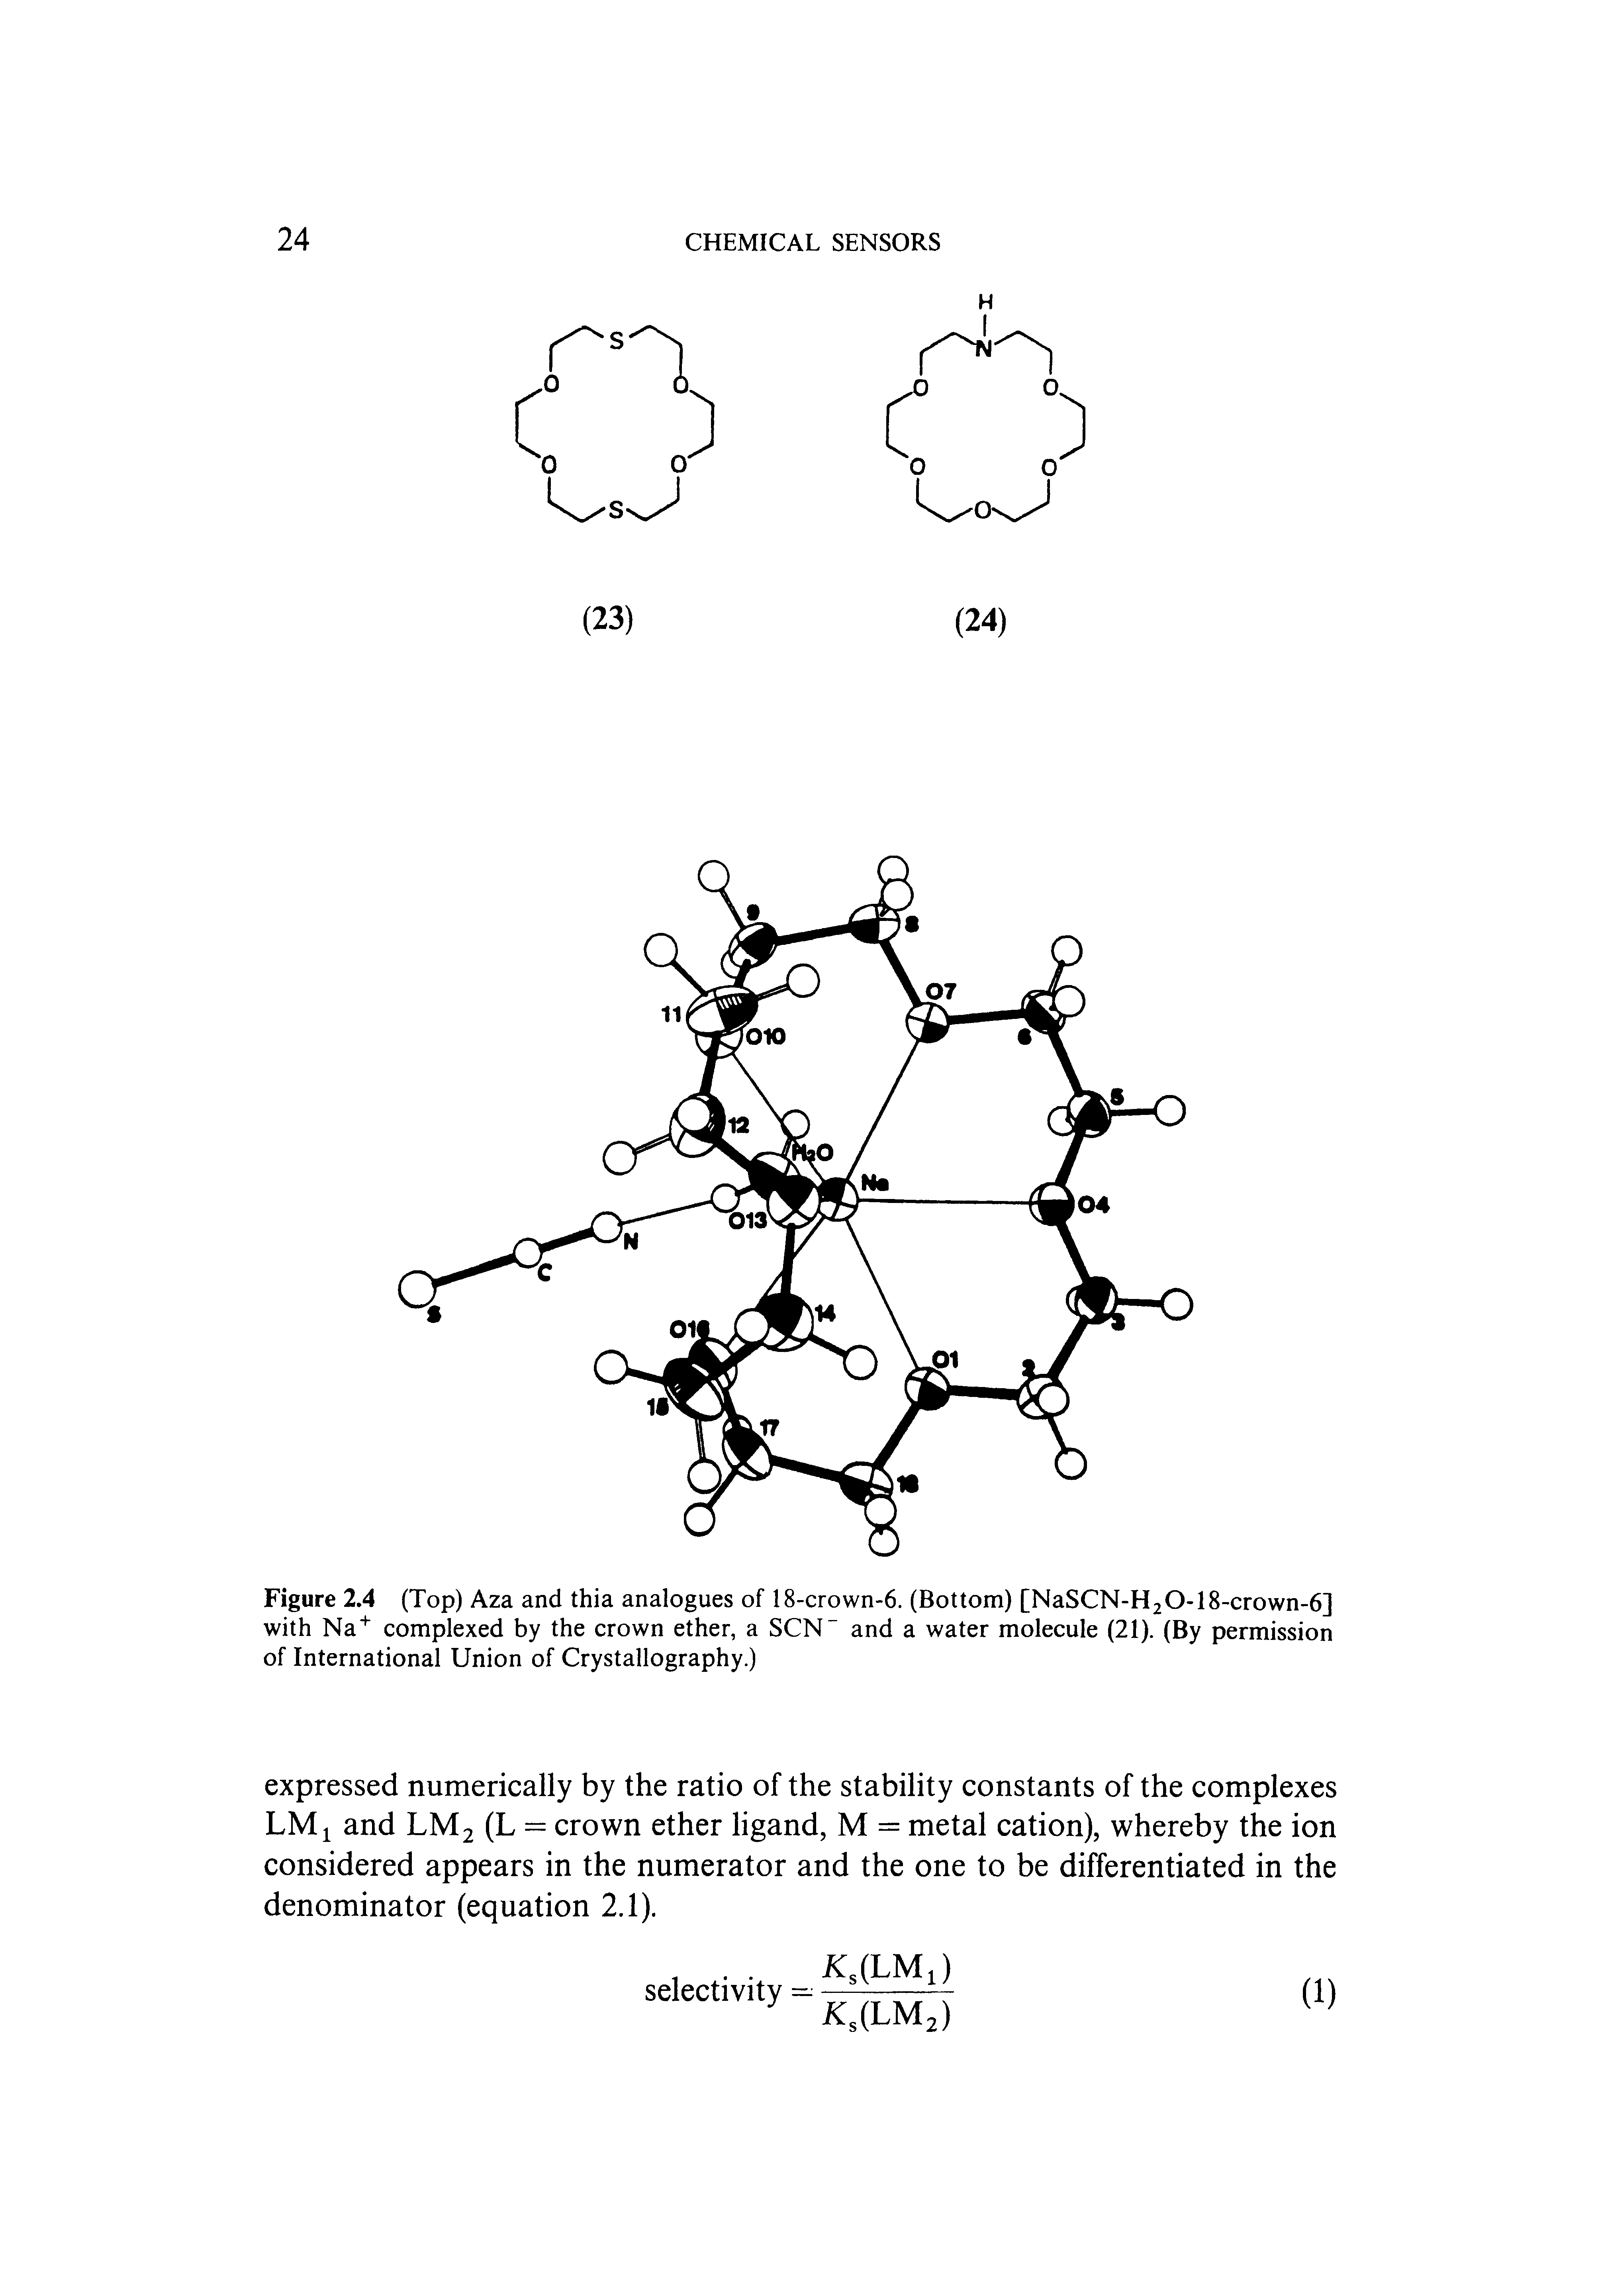 Figure 2.4 (Top) Aza and thia analogues of 18-crown-6. (Bottom) [NaSCN-H20-18-crown-6] with Na" complexed by the crown ether, a SCN and a water molecule (21). (By permission of International Union of Crystallography.)...